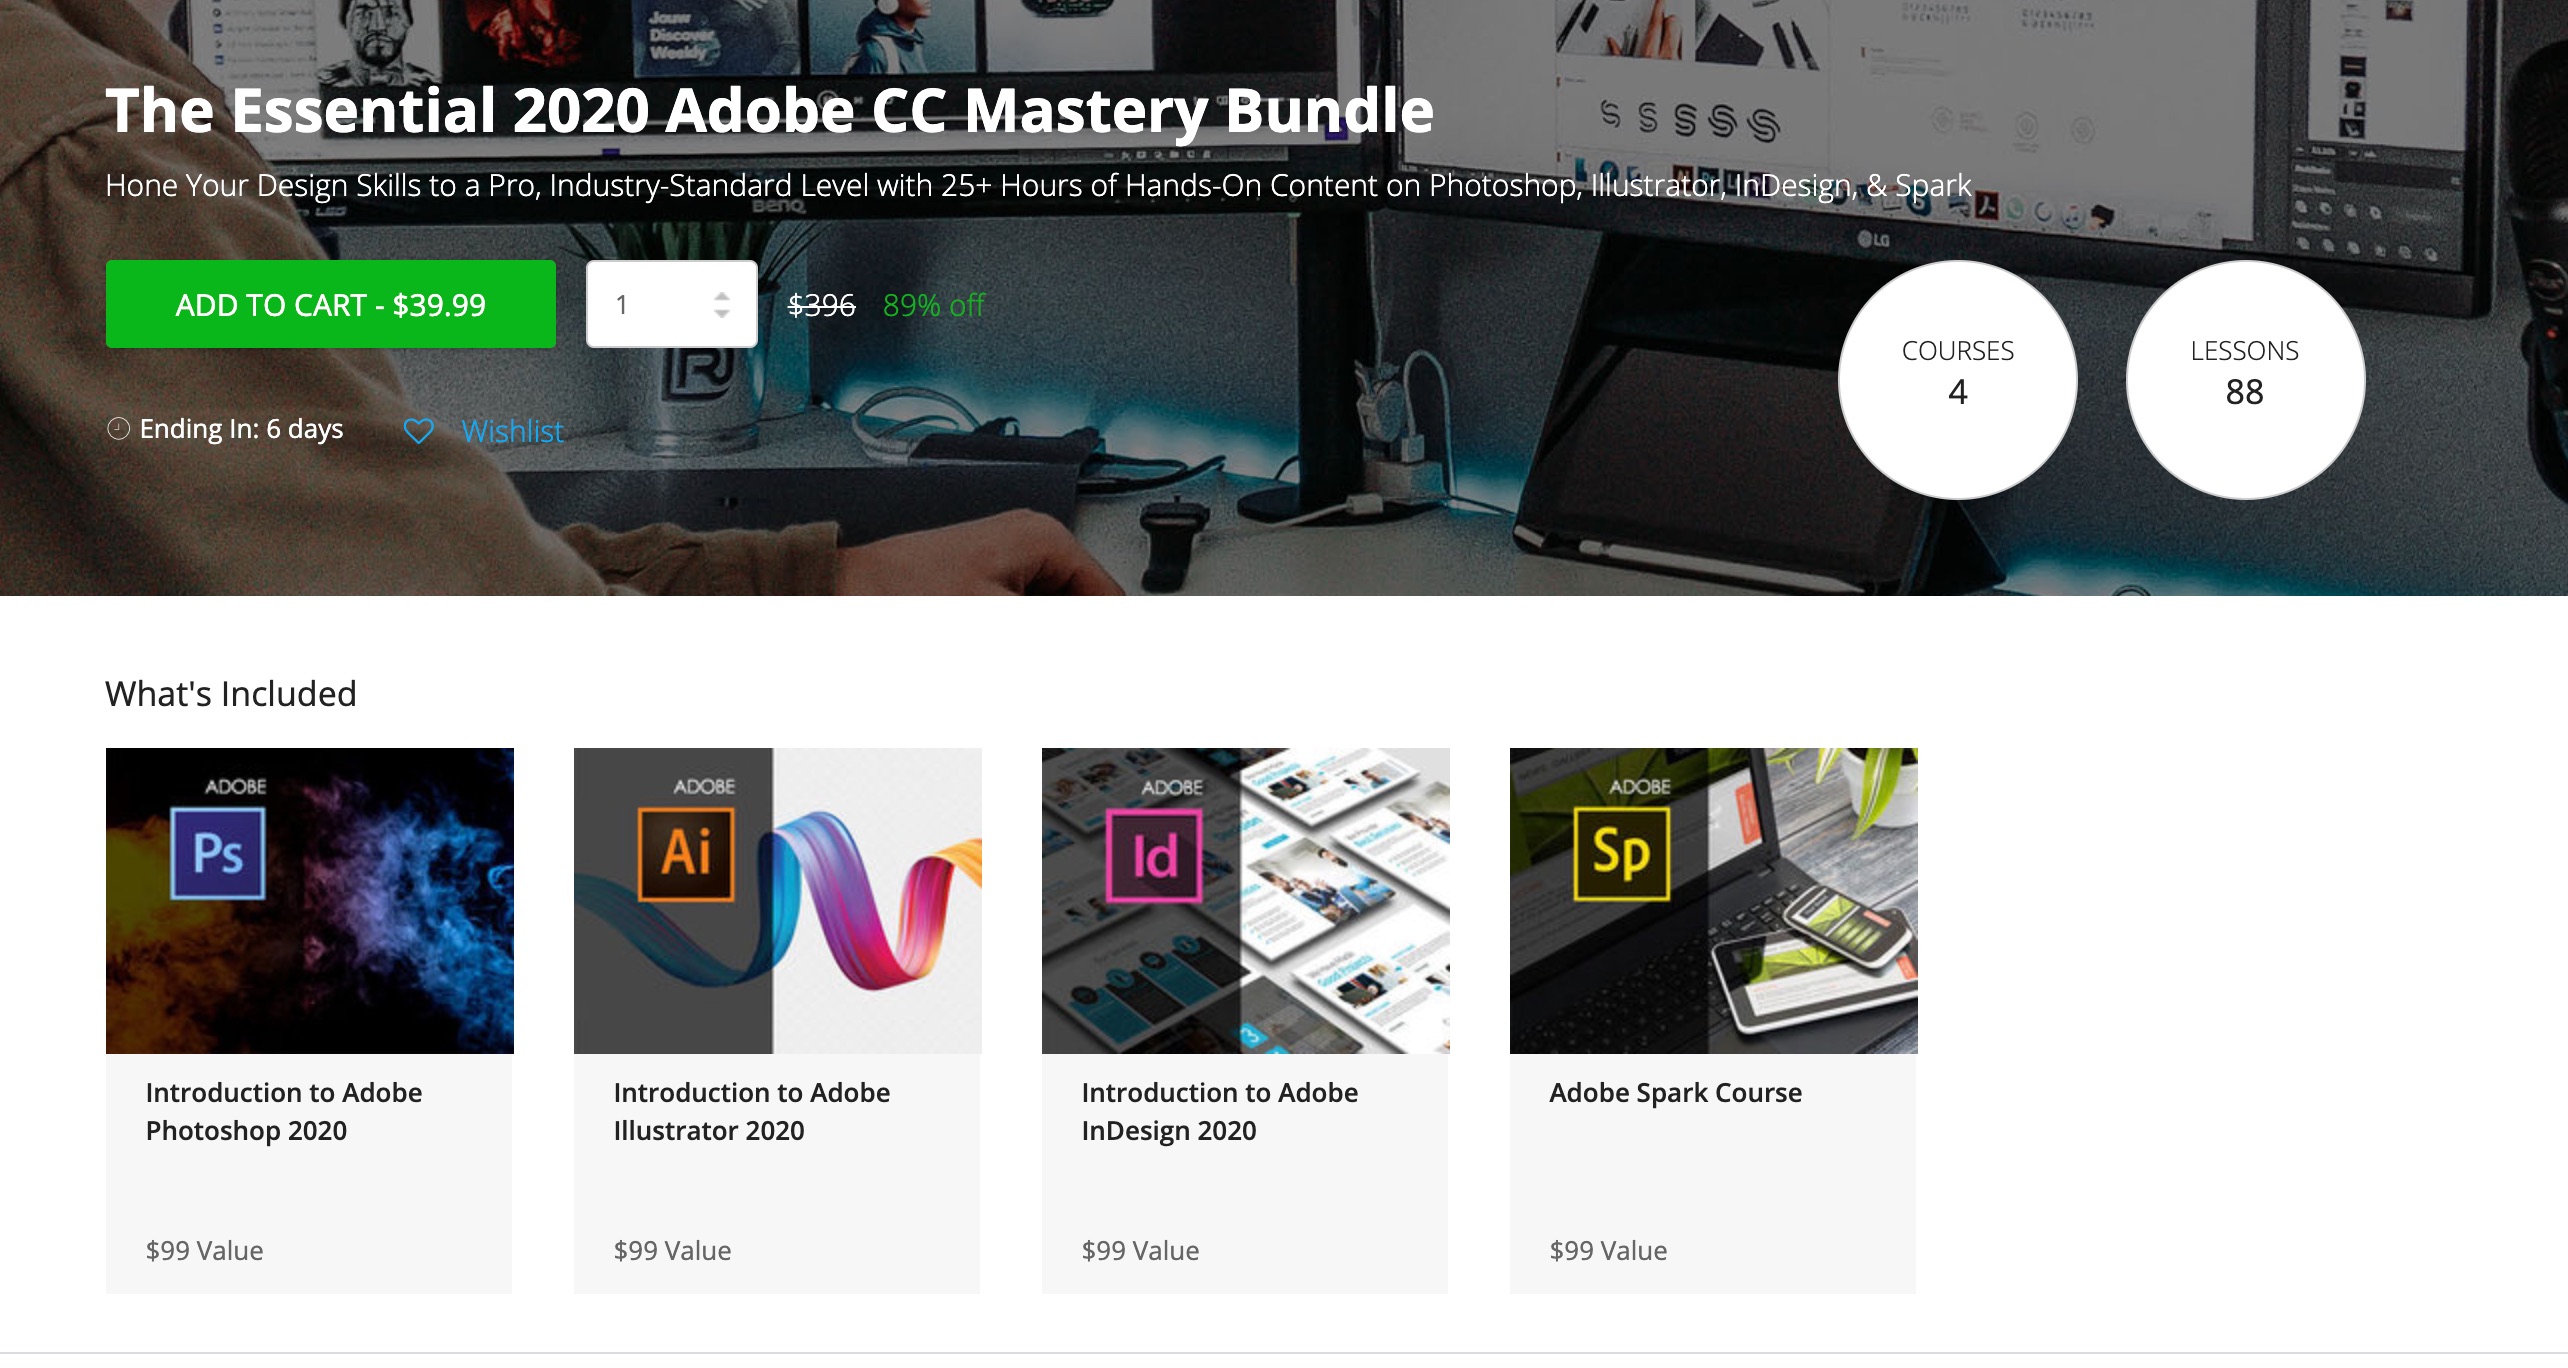 The Essential 2020 Adobe CC Mastery Bundle Hone Your Design Skills to a Pro, Industry-Standard Level with 25+ Hours of Hands-On Content on Photoshop, Illustrator, InDesign, & Spark